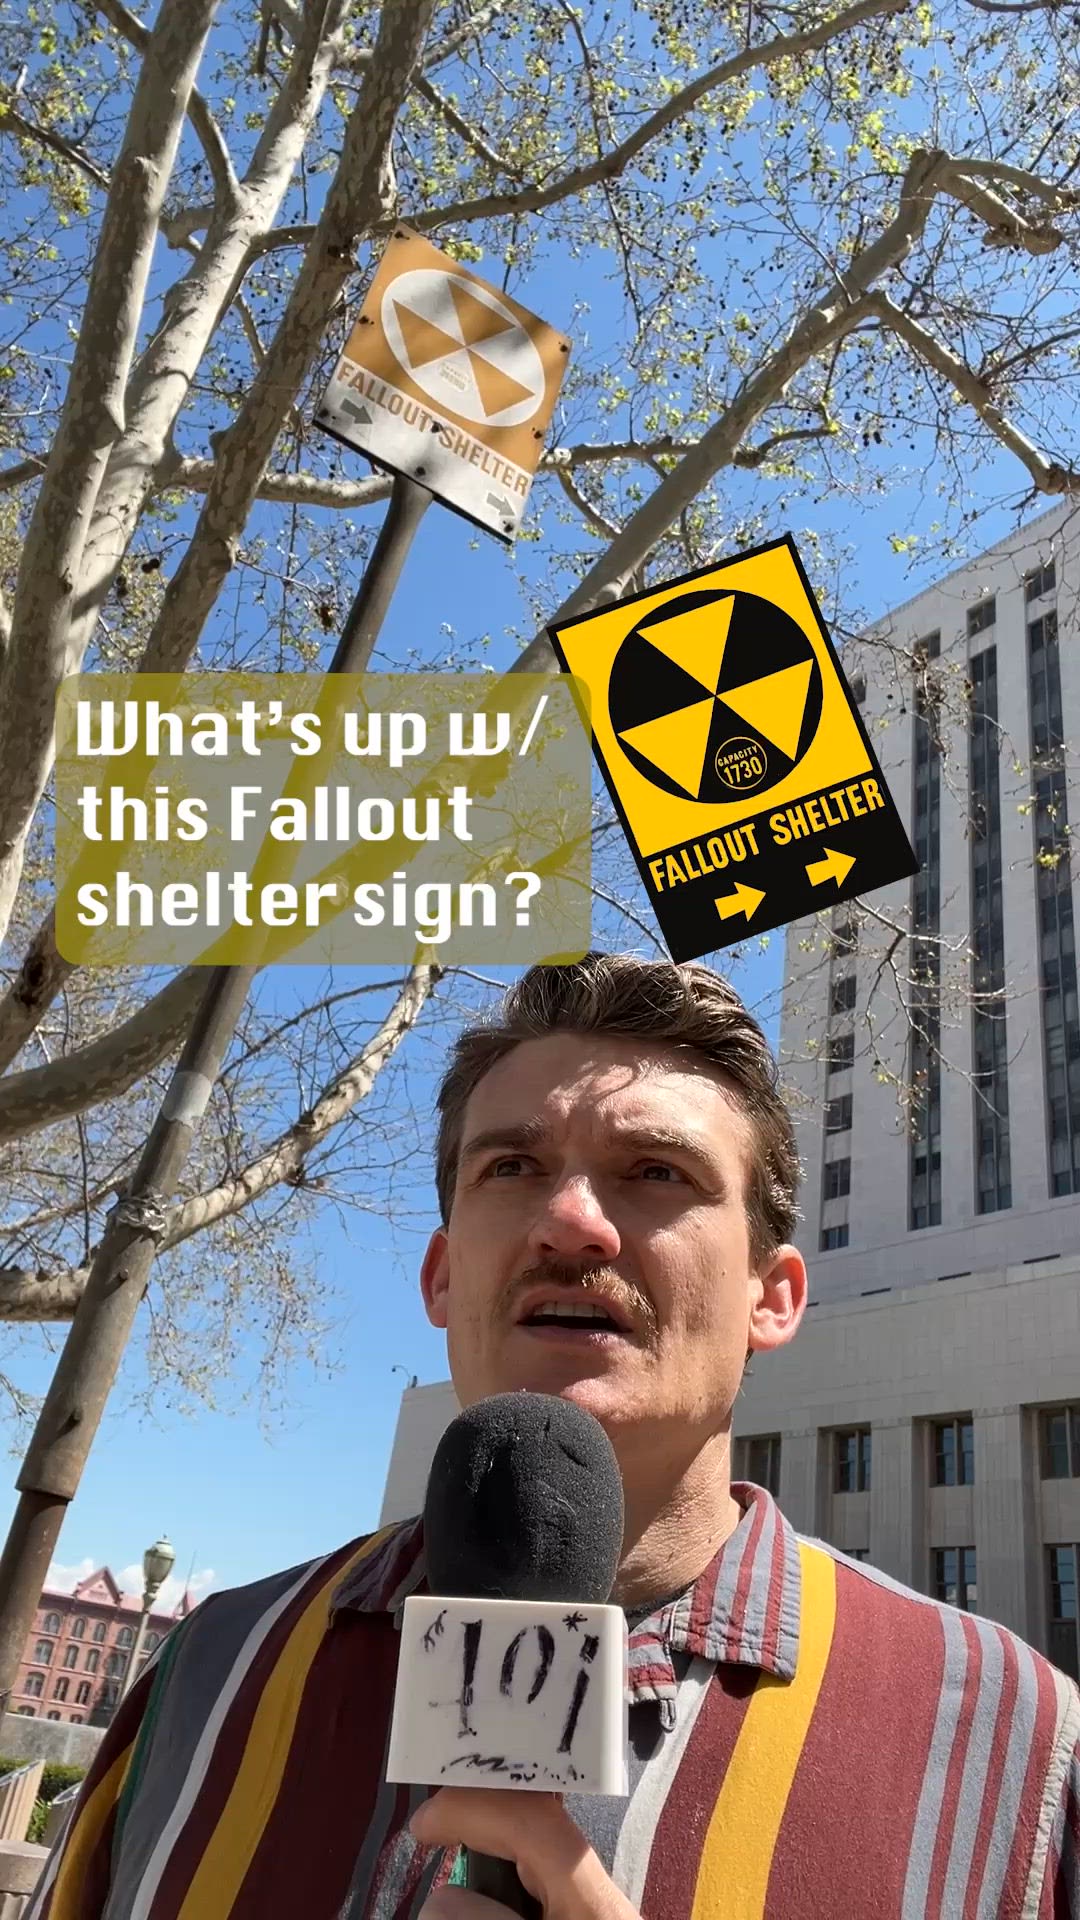 What’s up with the fallout shelter sign in downtown L.A.?